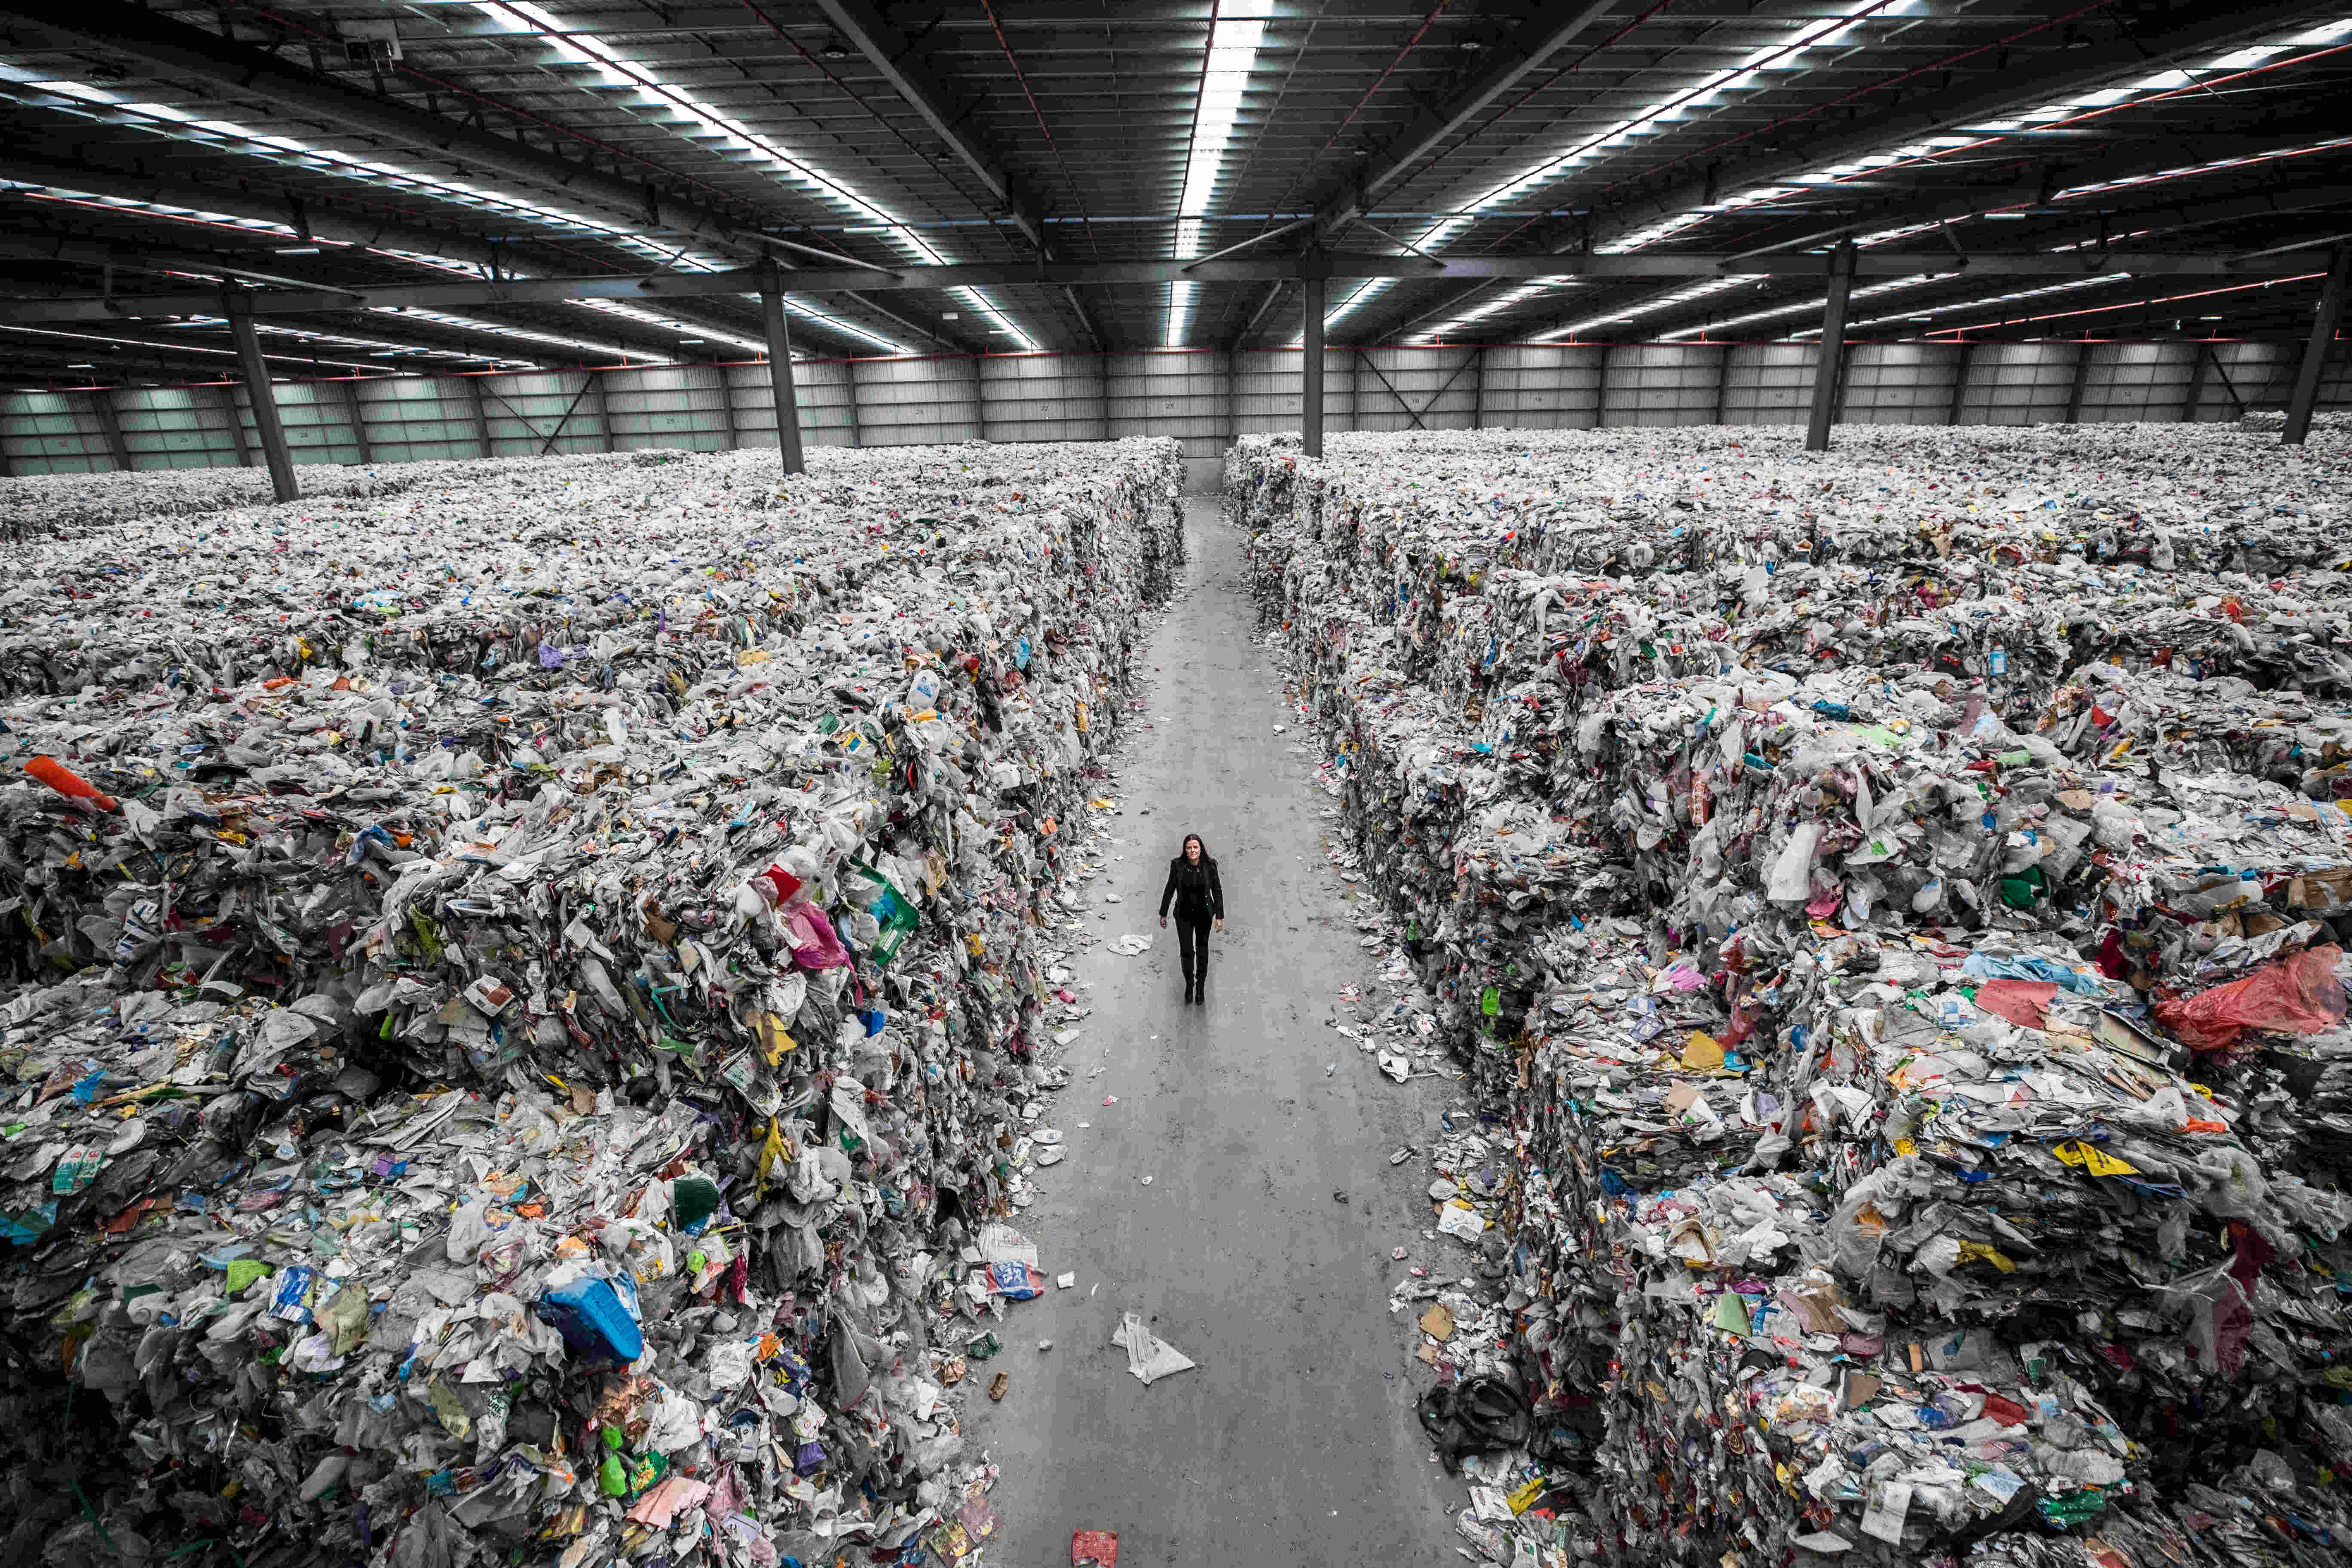 Gigantic wearhouse full of recyclable materials awaiting processing in  Melbourne, Victoria, Australia.